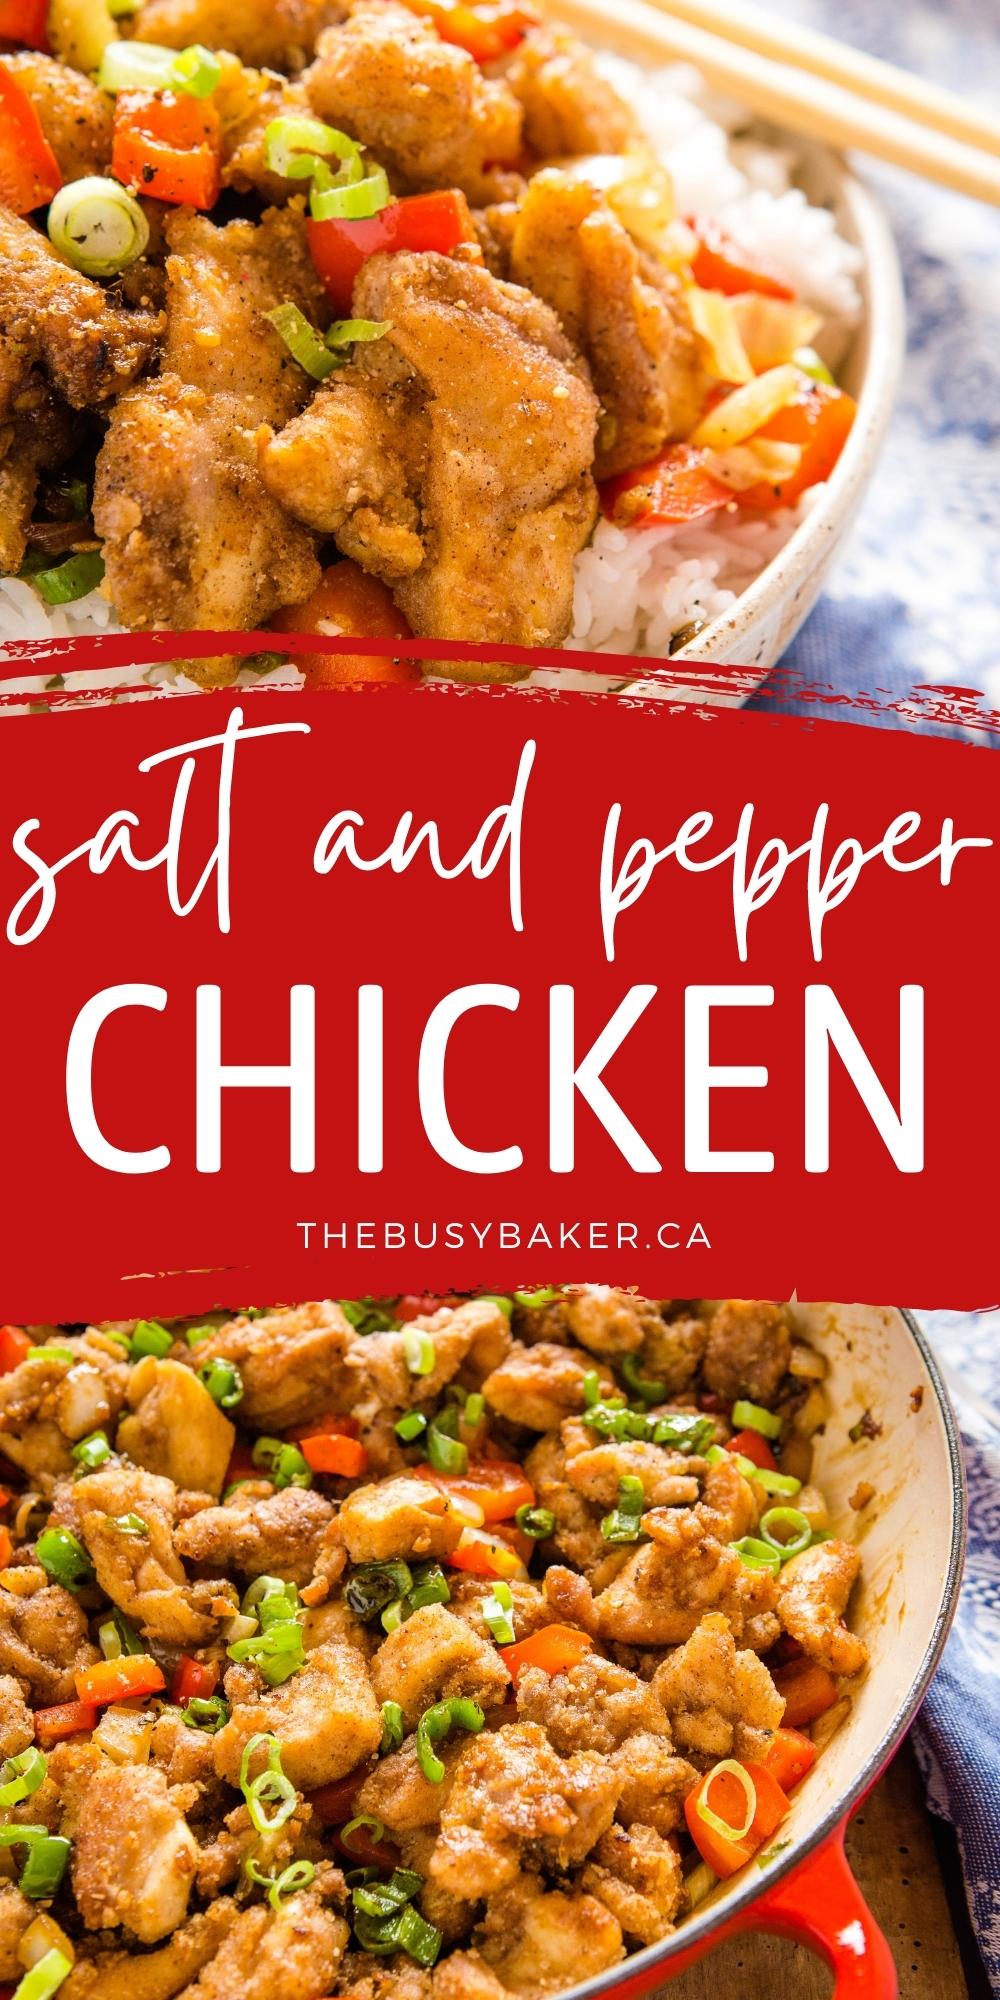 This Salt and Pepper Chicken is a delicious and easy Chinese take-out-style meal - spicy crispy chicken with sautéed veggies served over rice! Recipe from thebusybaker.ca! #chinesefood #chinesetakeout #takeout #homemade #saltandpepperchicken #crispychicken #fried #stirfry #fakeaway #easymeal via @busybakerblog